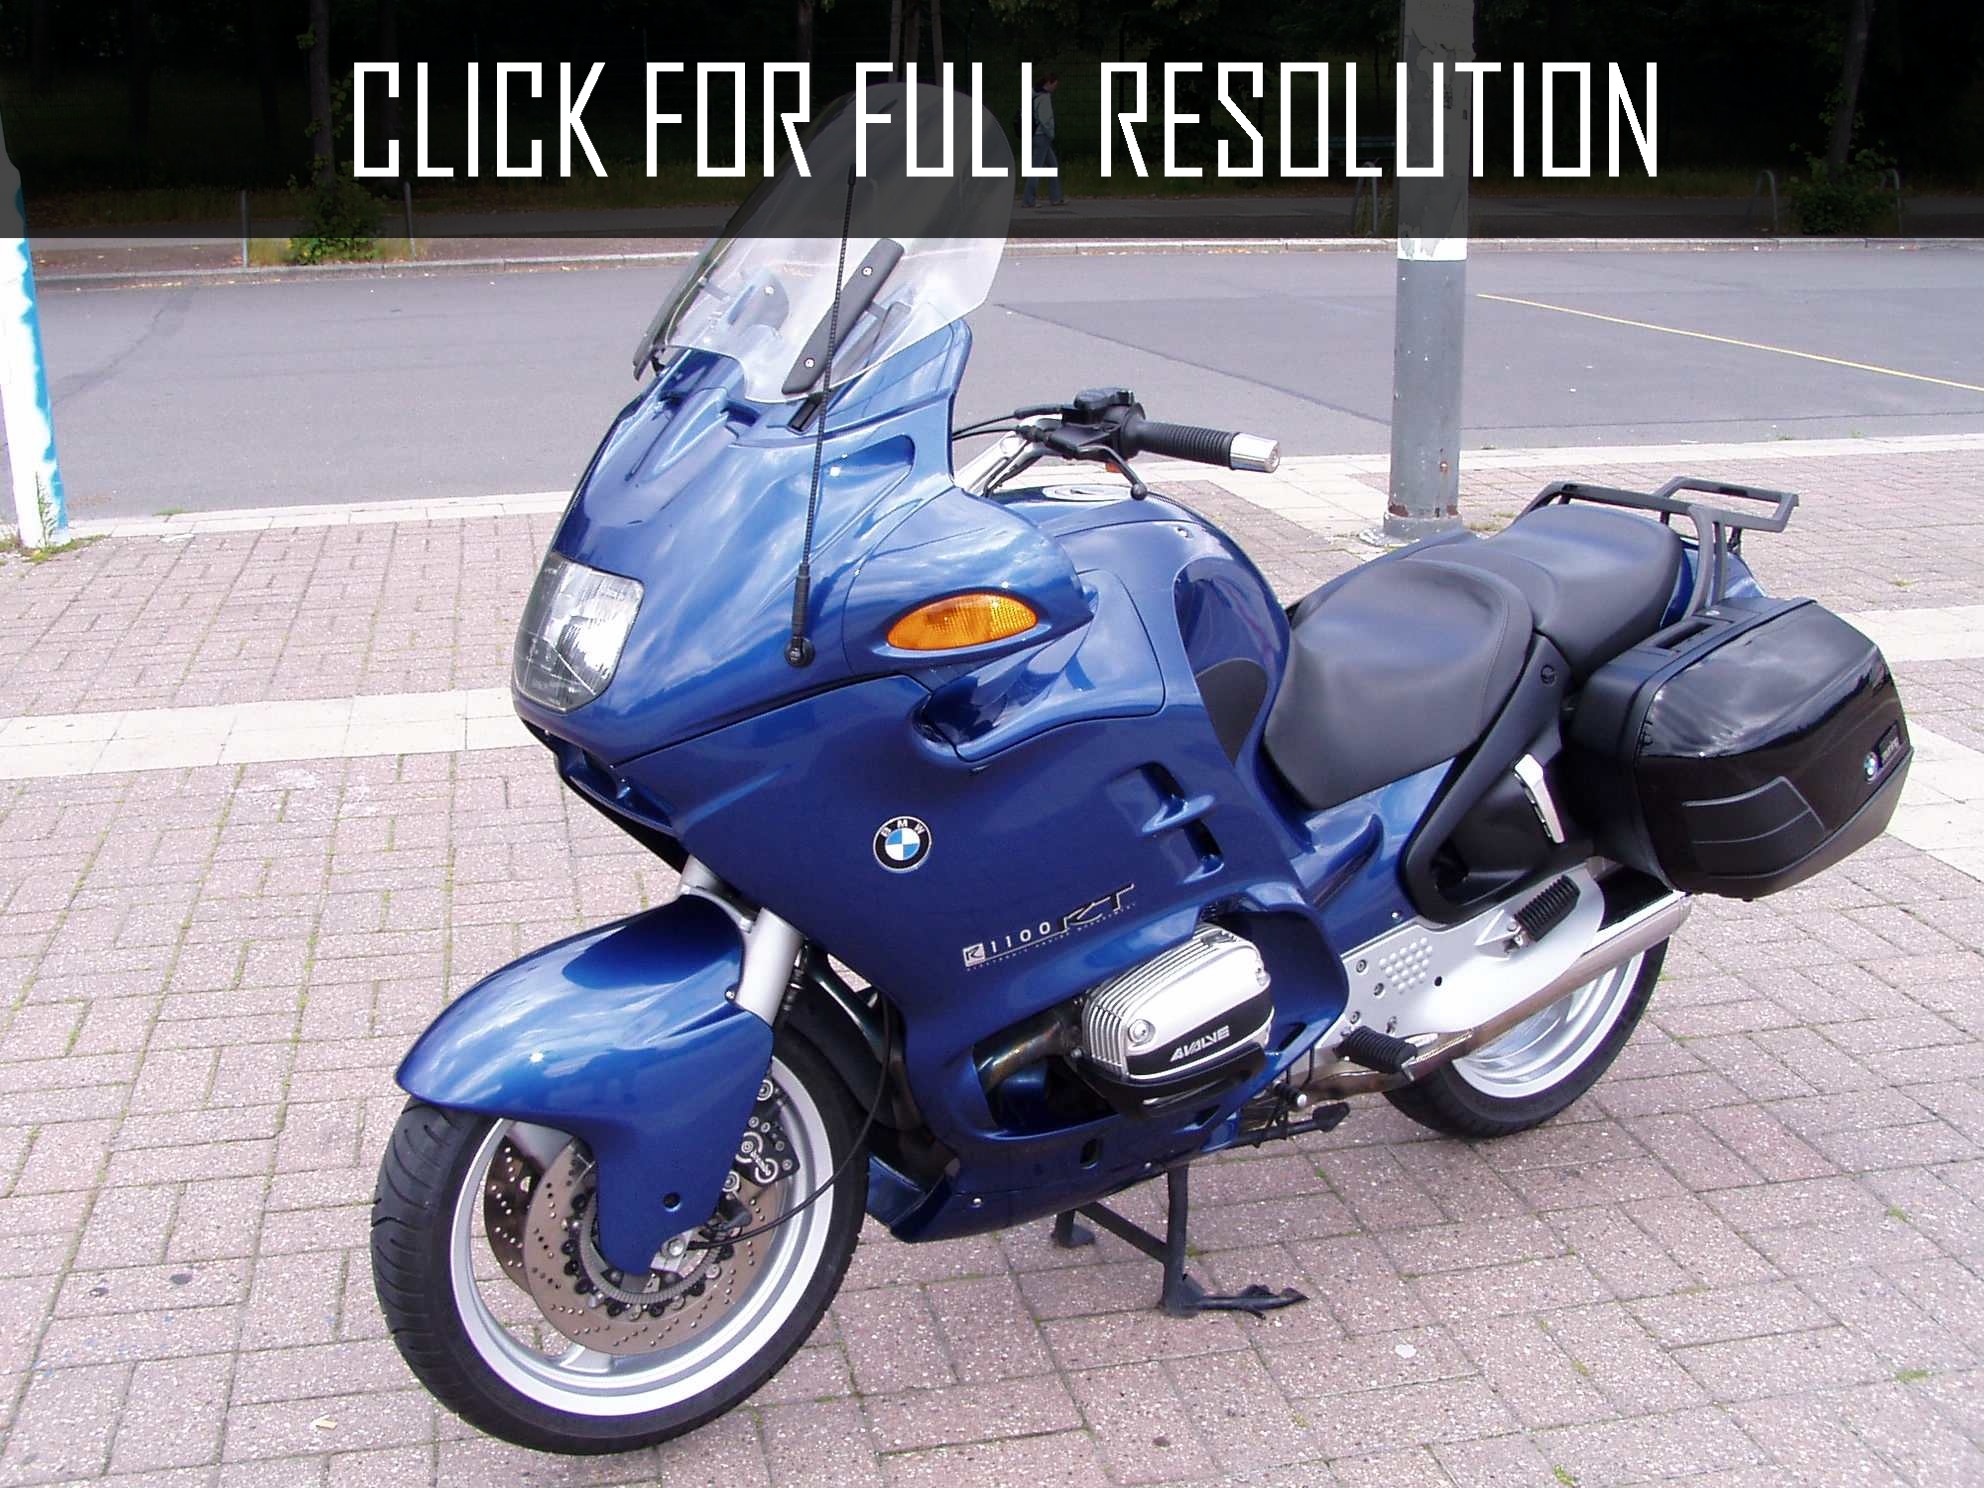 Bmw R 1100 Rt amazing photo gallery, some information